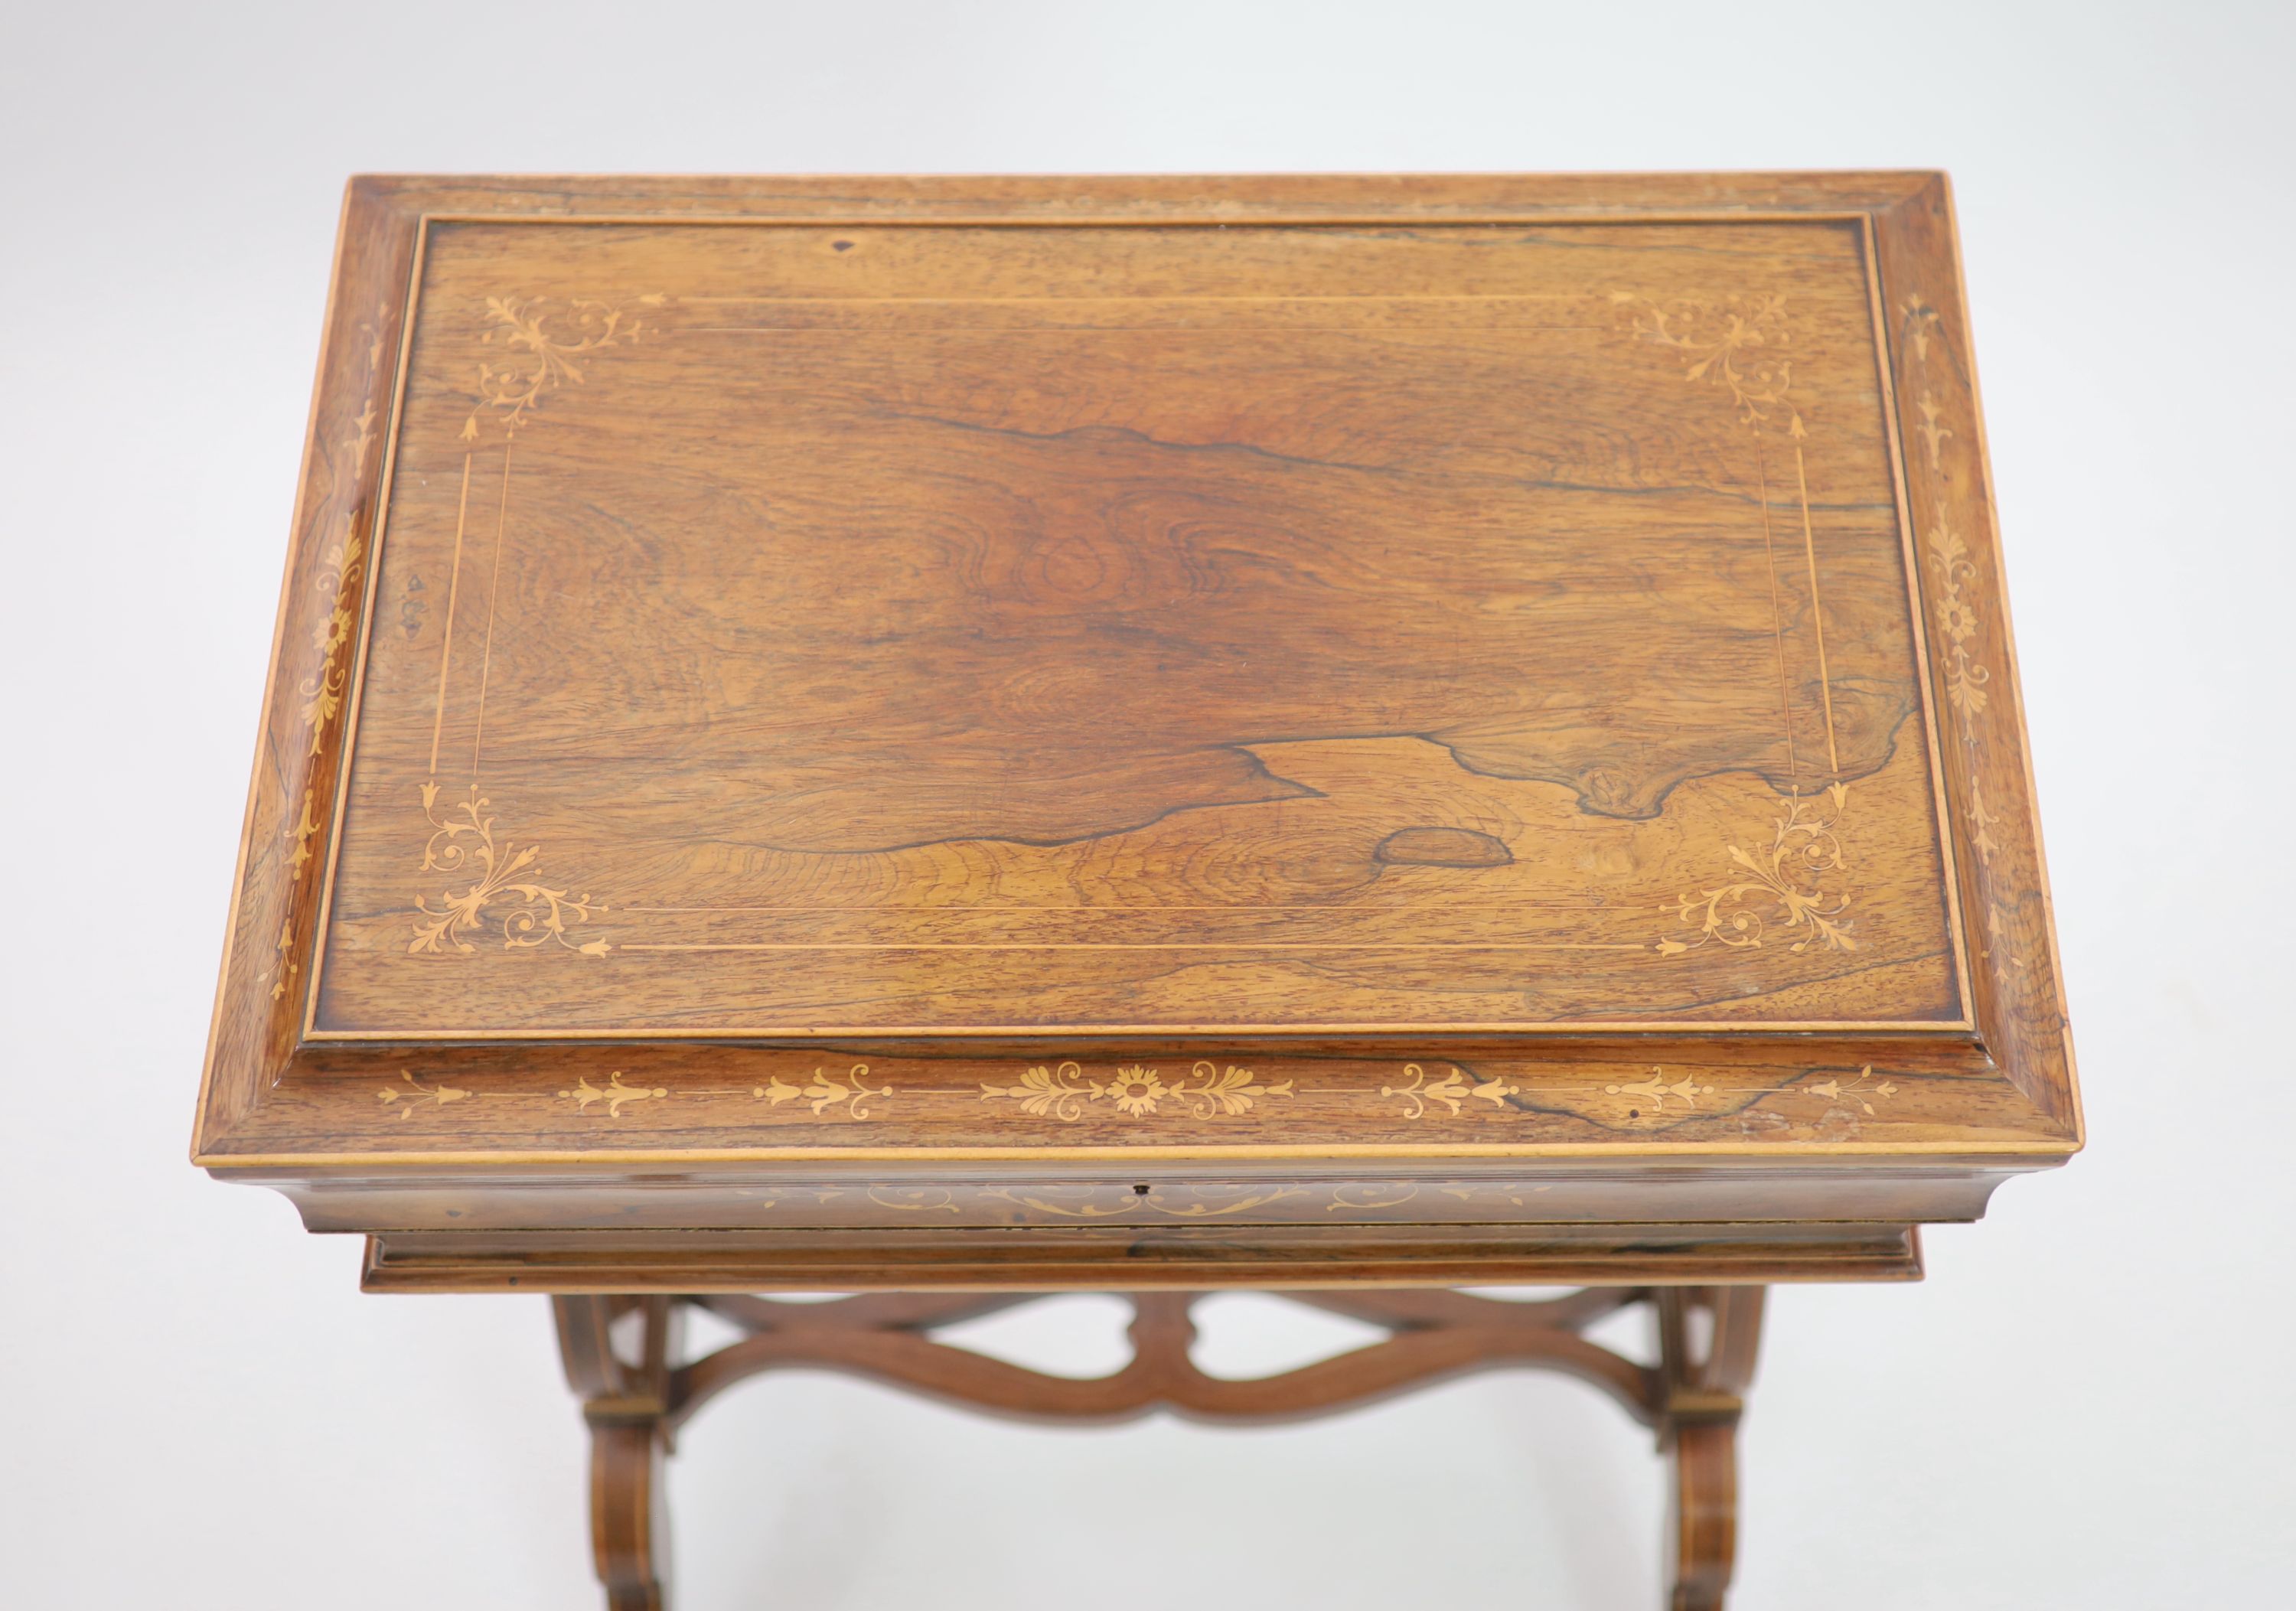 A 19th century French rosewood and sycamore lined lady's dressing table, c.1830, by Alphonse - Image 6 of 6